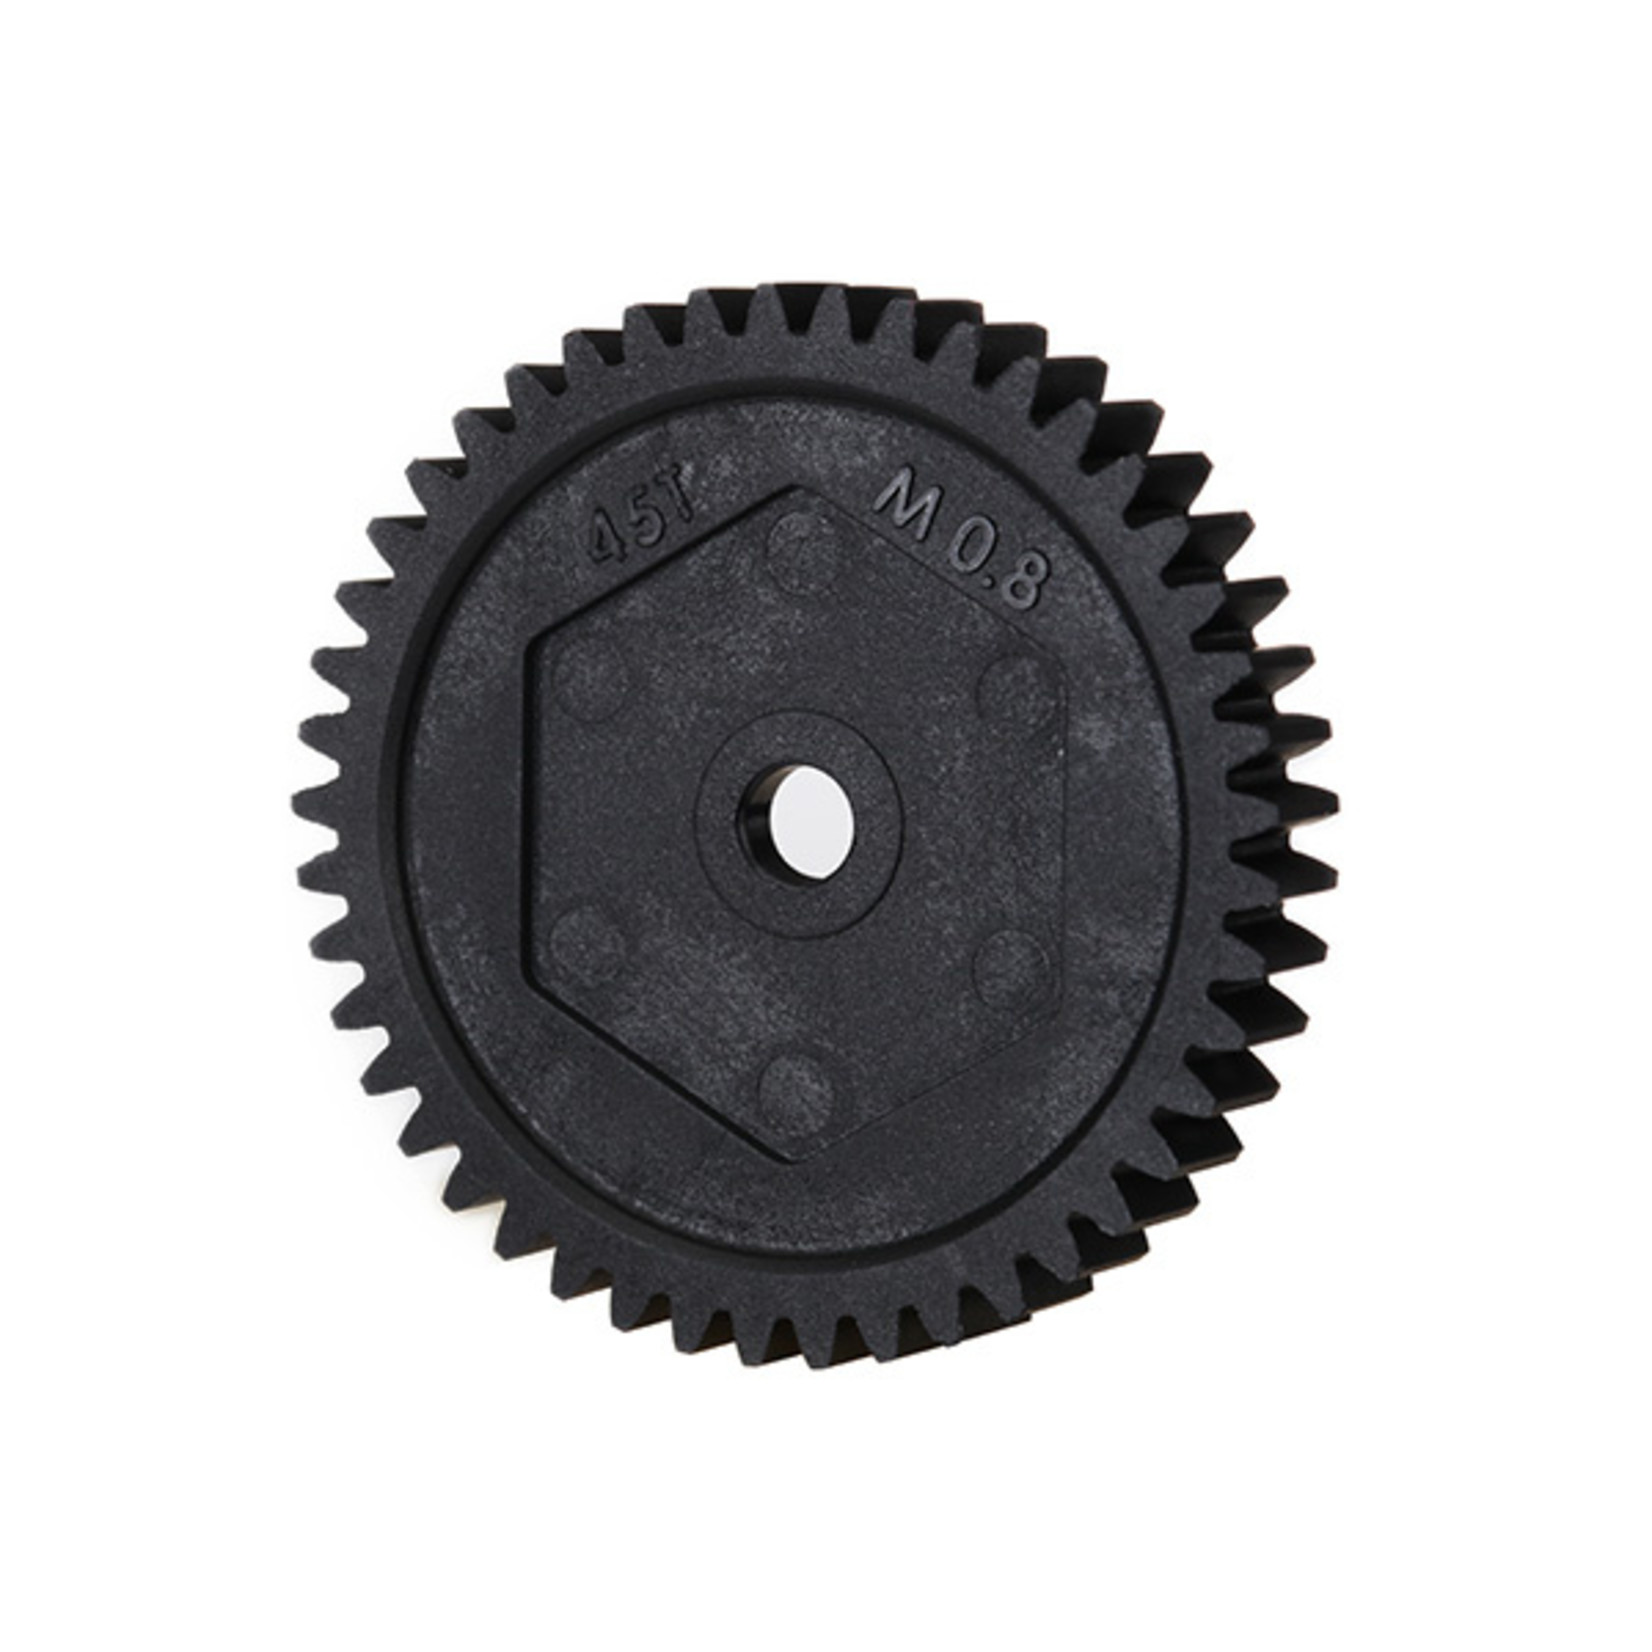 Traxxas 8053 - Spur gear, 45-tooth (32-pitch)